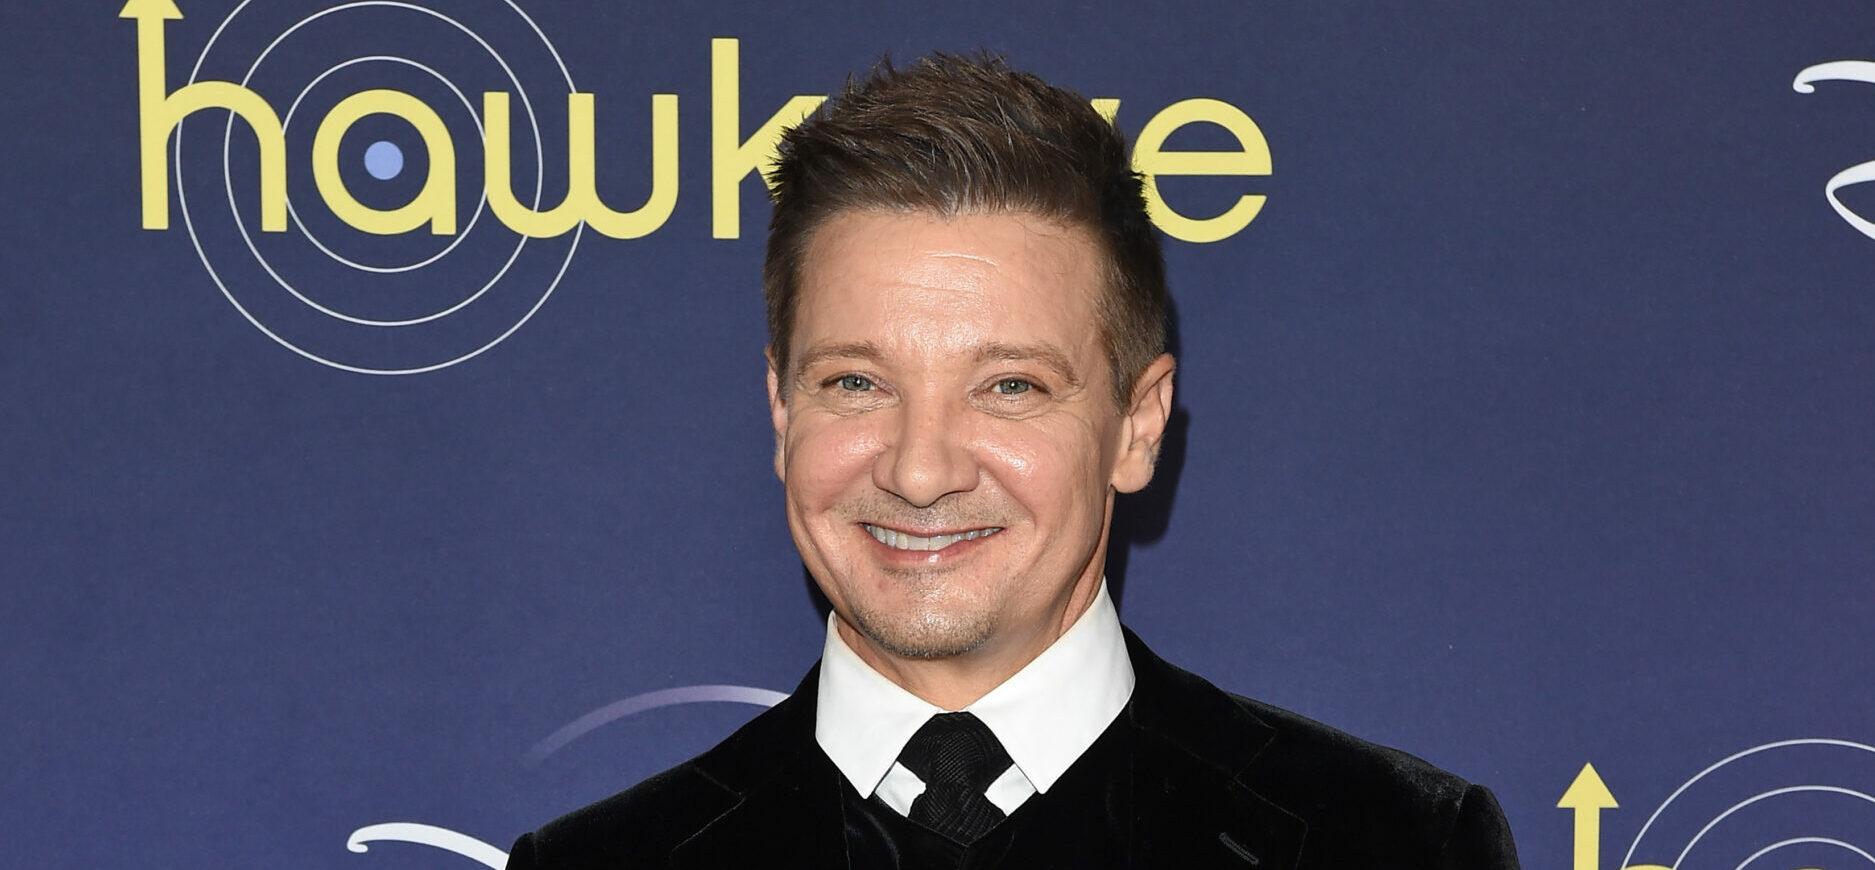 Marvel Star Jeremy Renner No Longer Considers Acting ‘A Priority’ After Horrific Snow Plow Accident